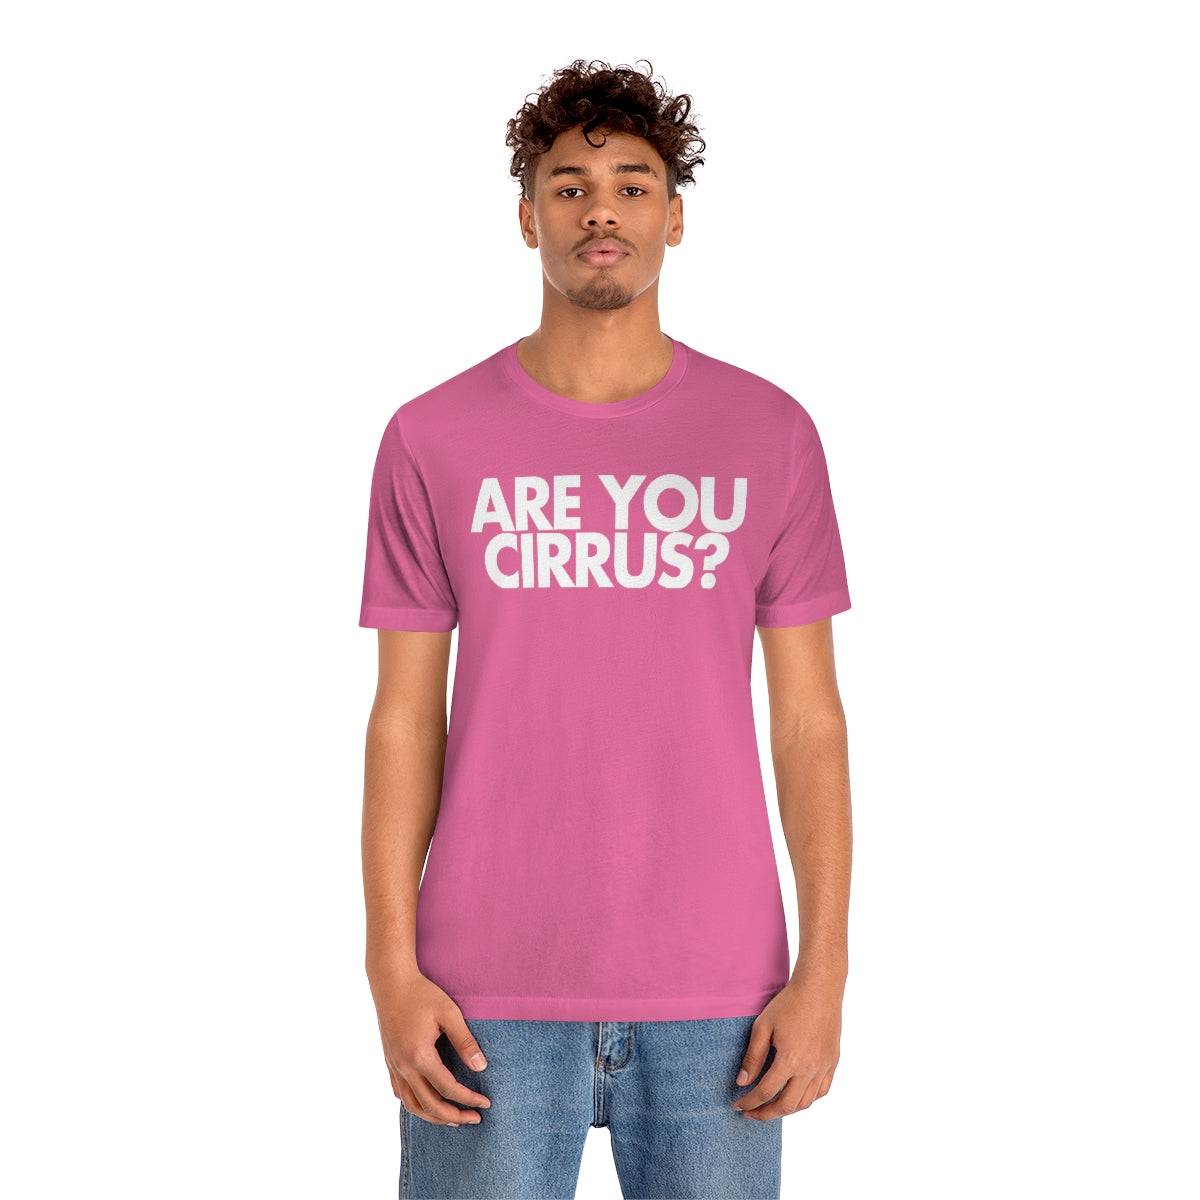 Are You Cirrus? Tee 